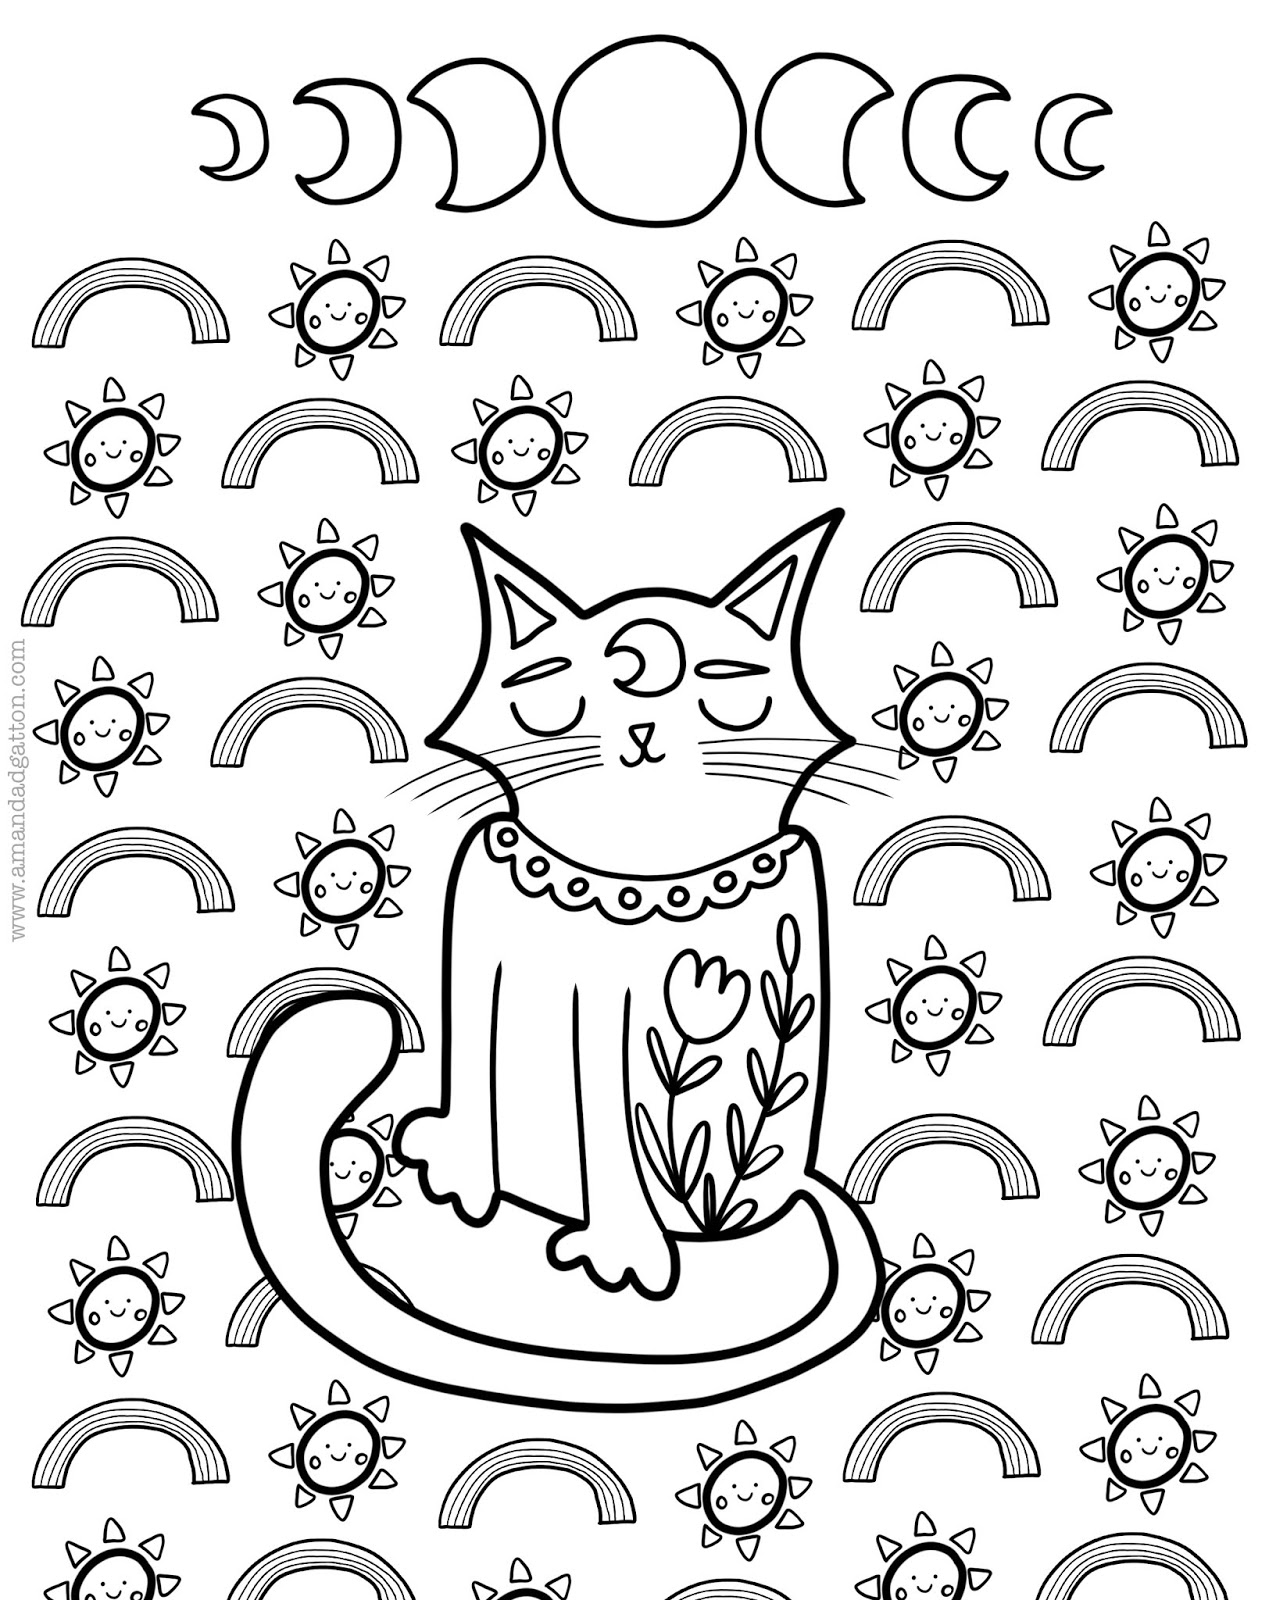 Easy How to Draw a Folk Art Cat Tutorial & Folk Art Coloring Page